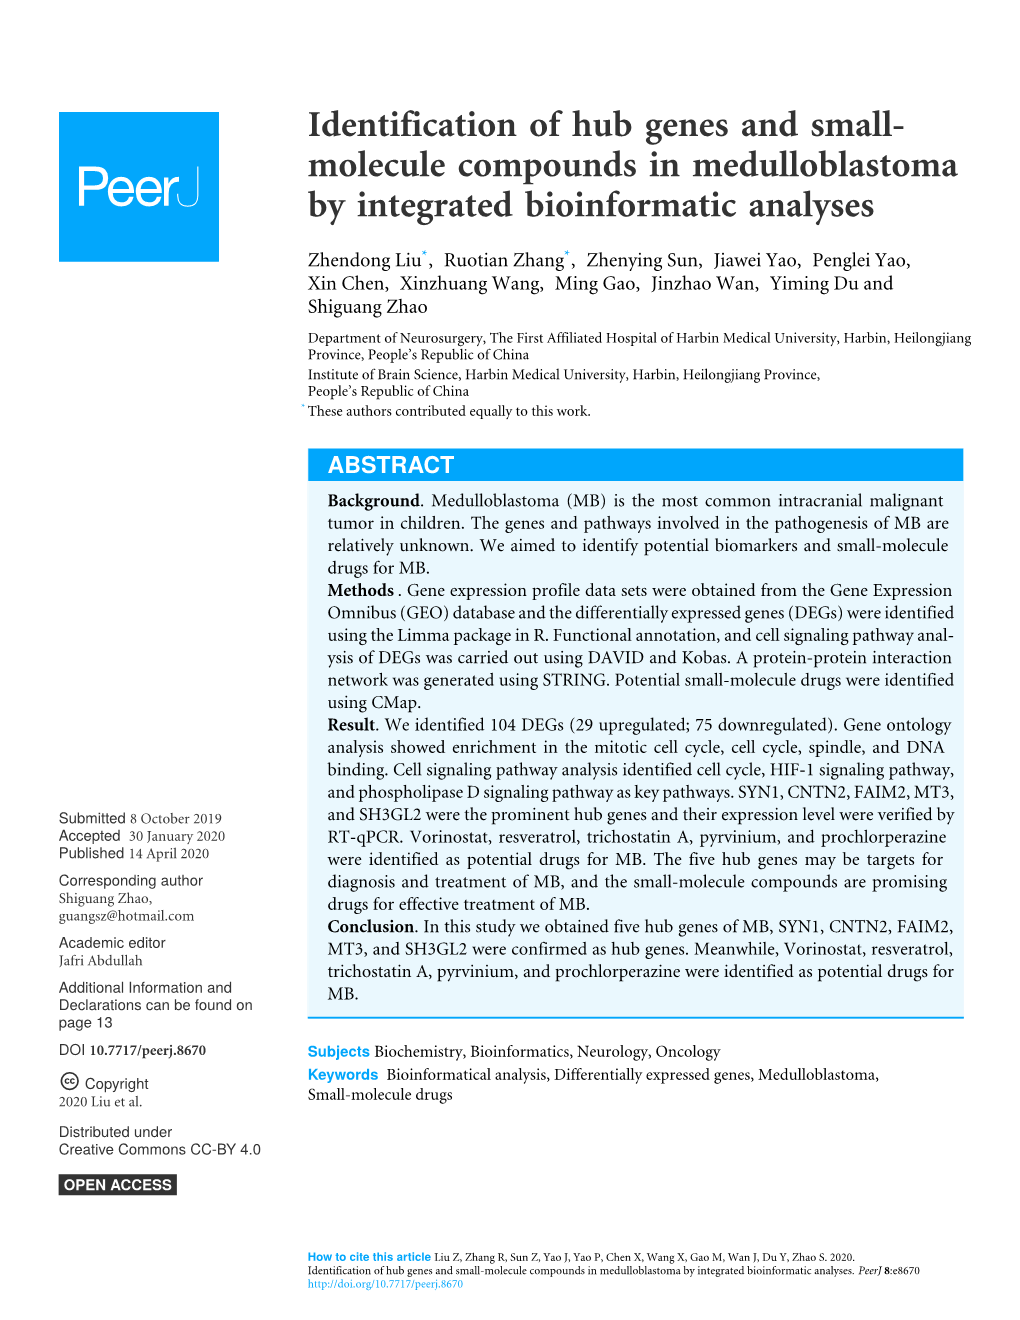 Identification of Hub Genes and Small-Molecule Compounds in Medulloblastoma by Integrated Bioinformatic Analyses